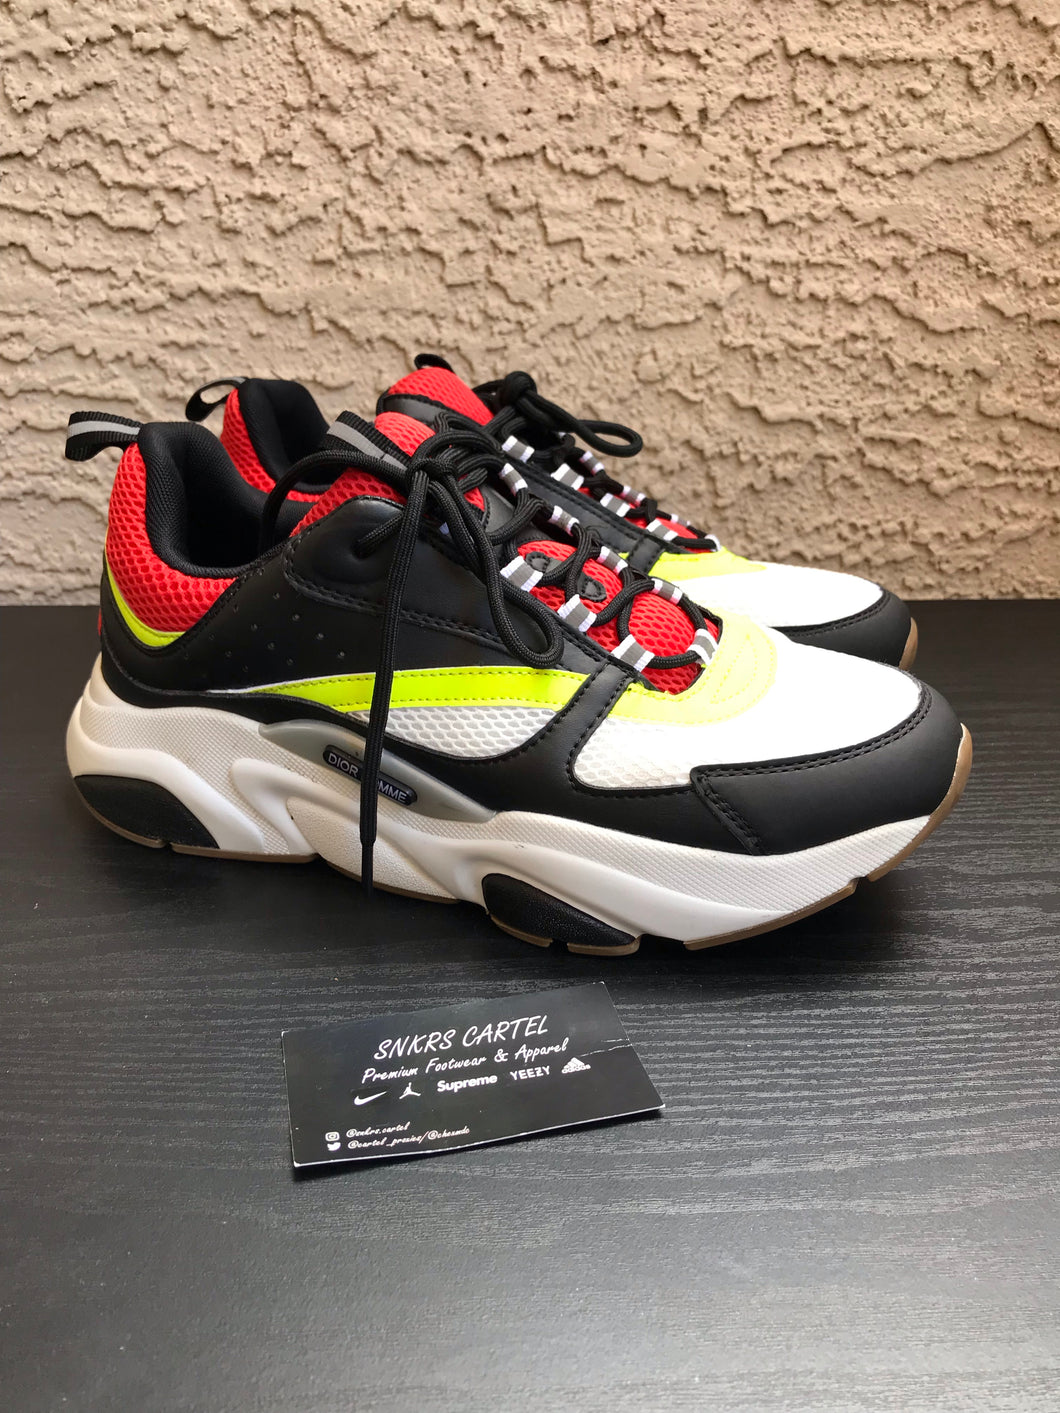 Dior Homme B22 Sneakers Yellow Red White – Snkrs Cartel